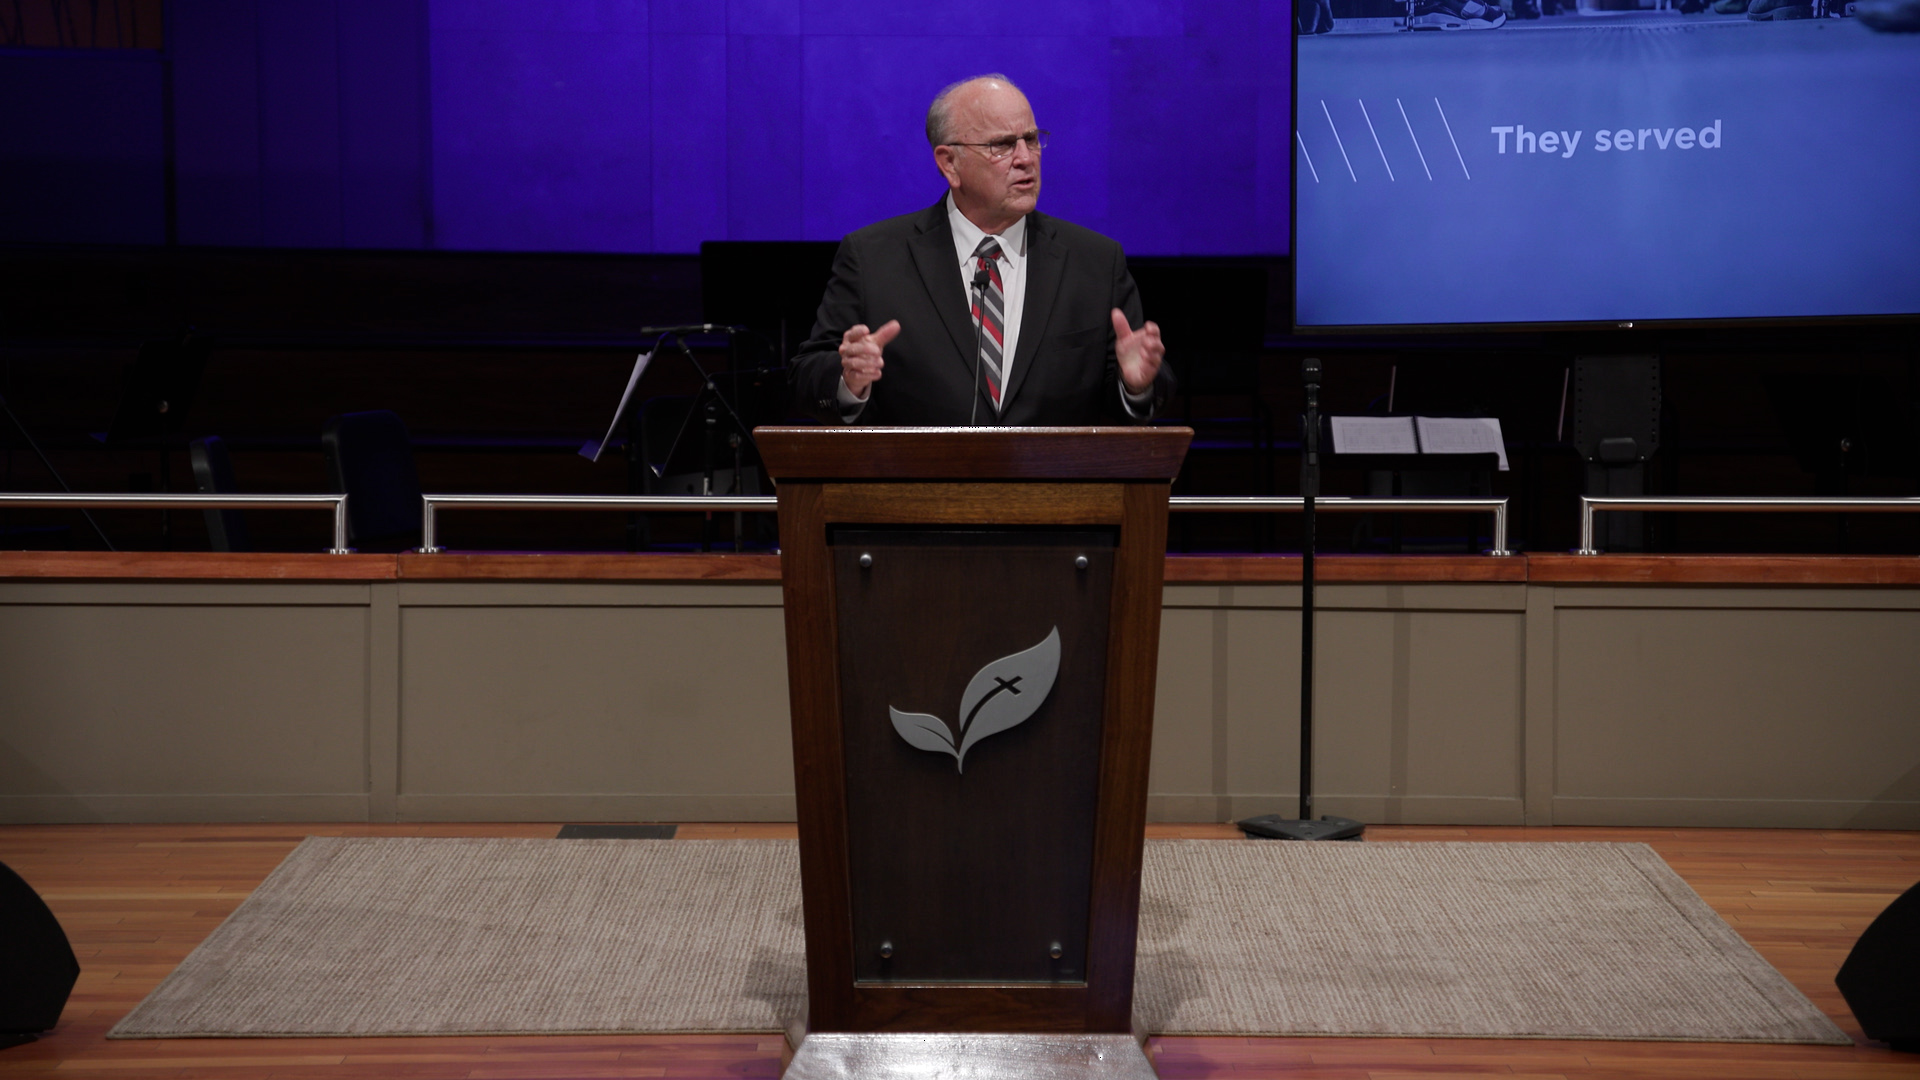 Dr. Mike Edwards: Serving Our Generation